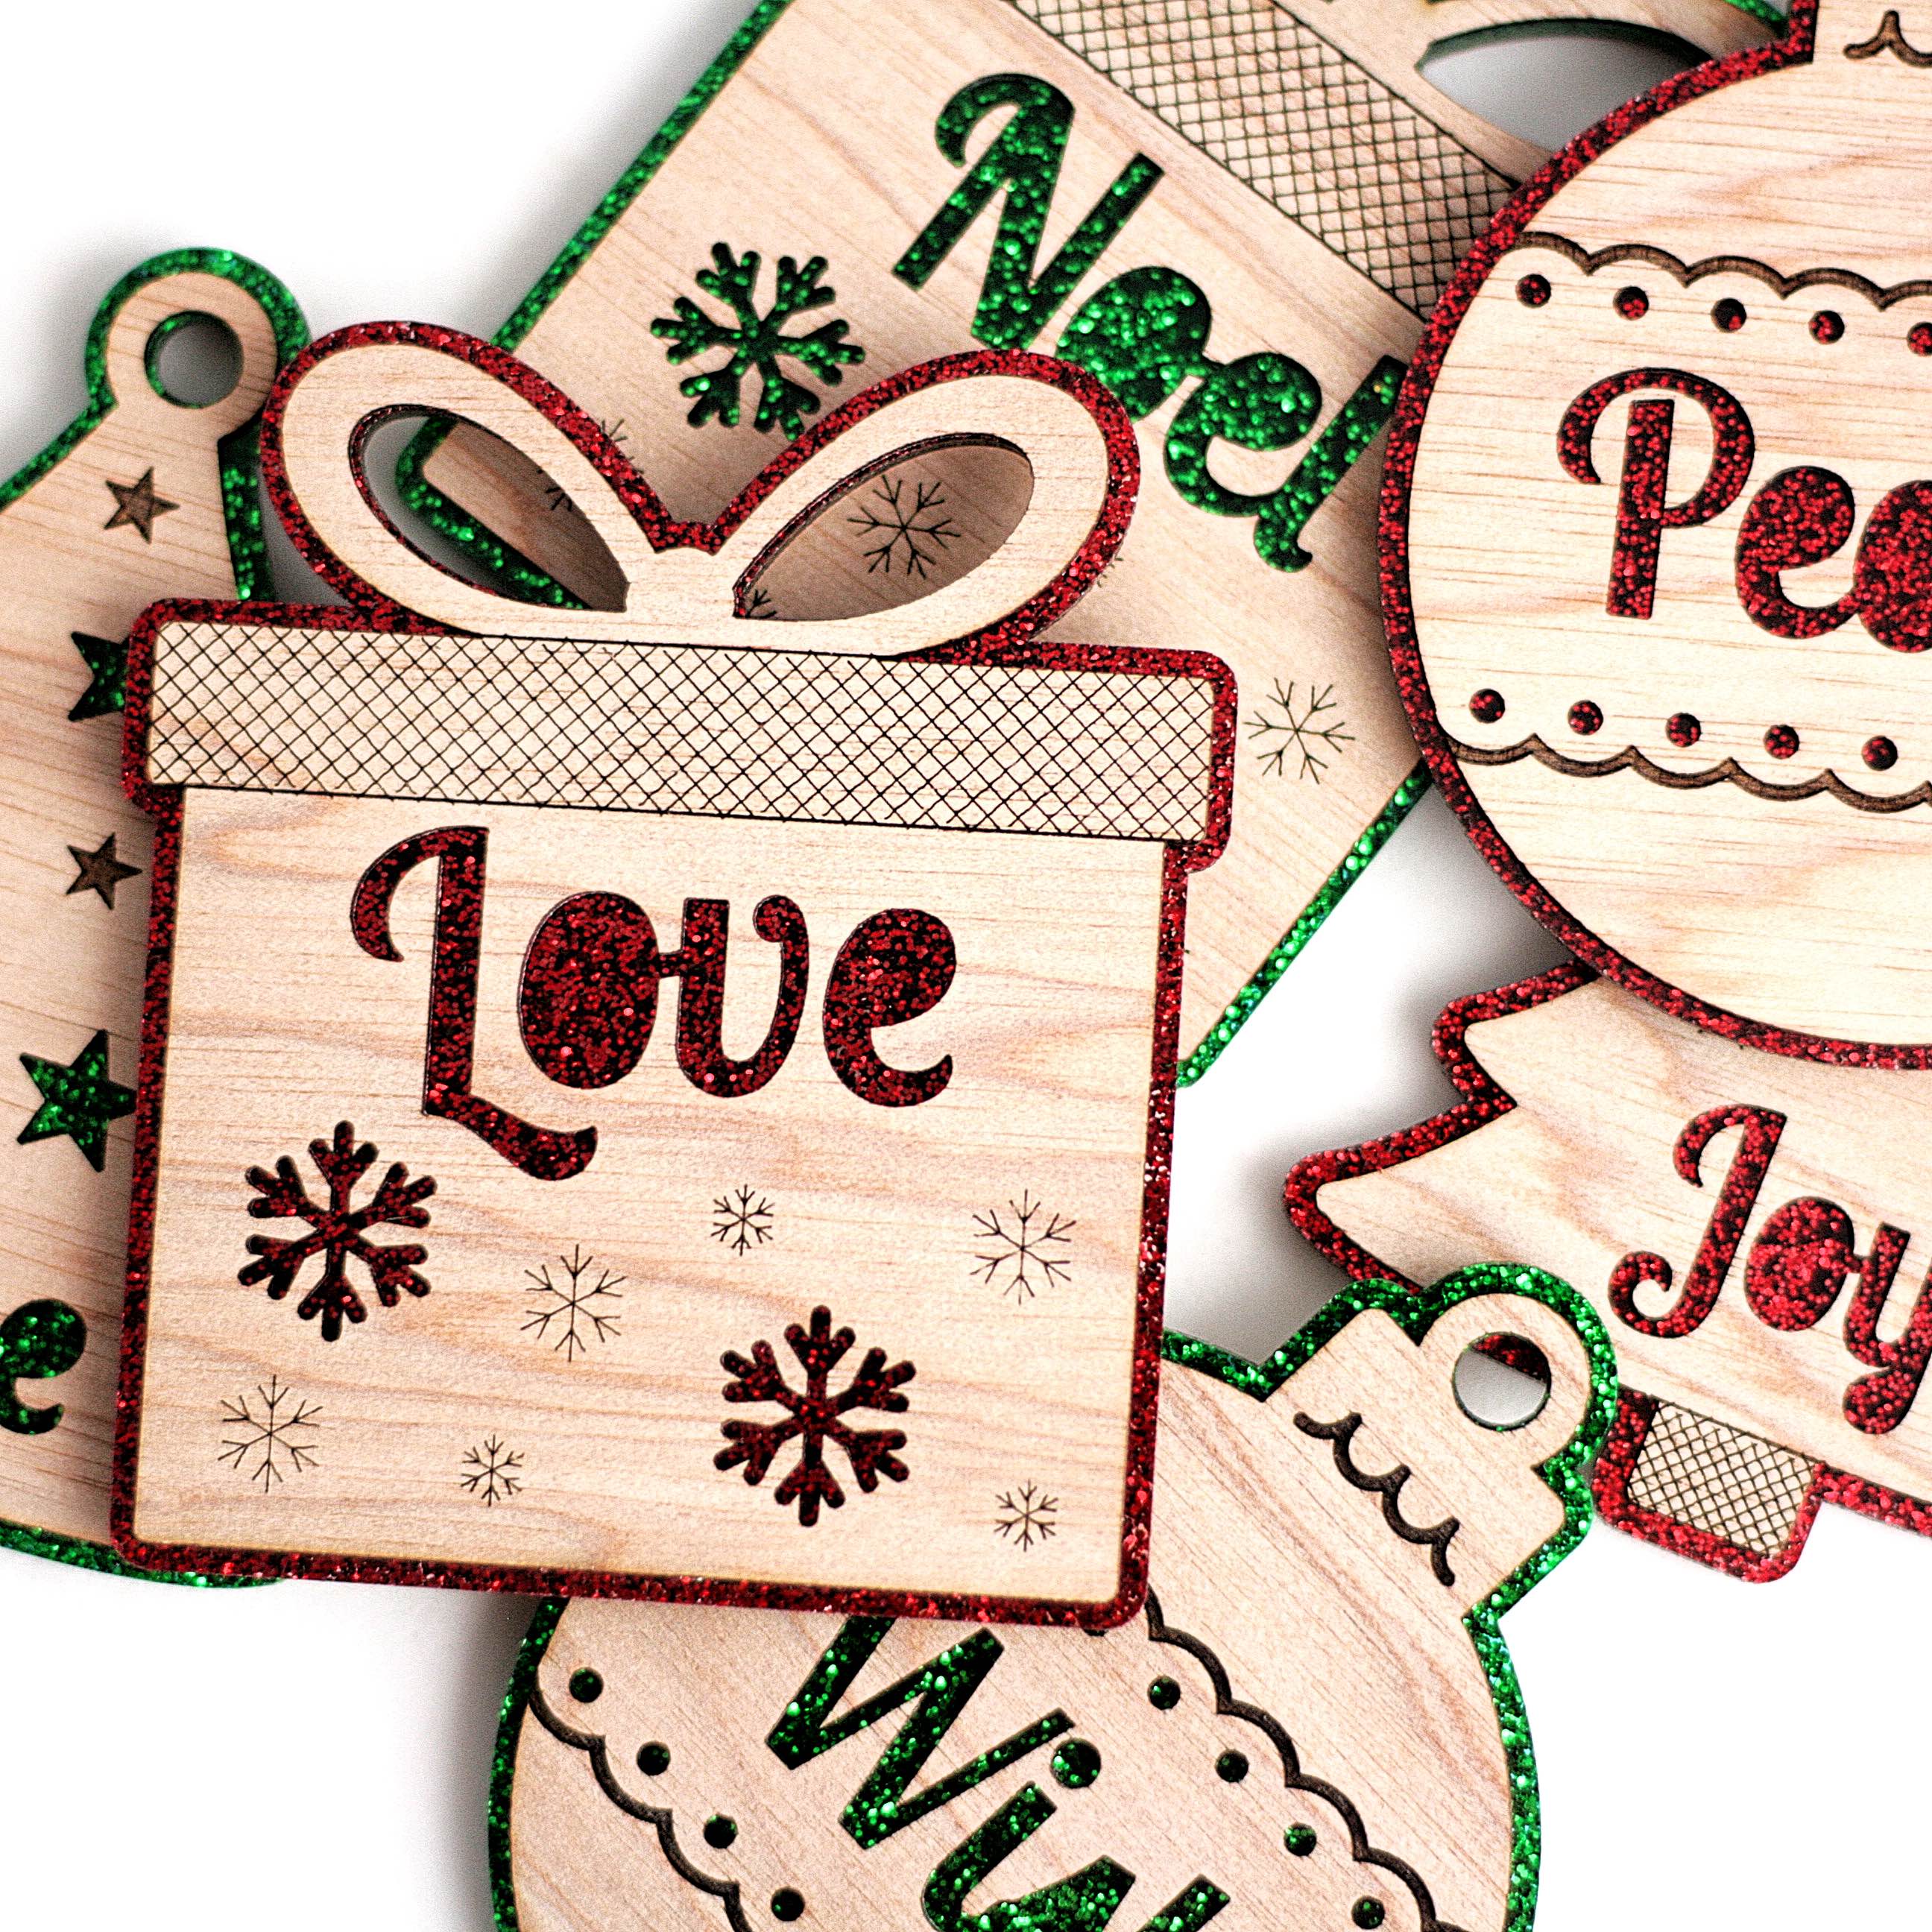 Set of 6 Glitter and Wood Christmas Ornaments